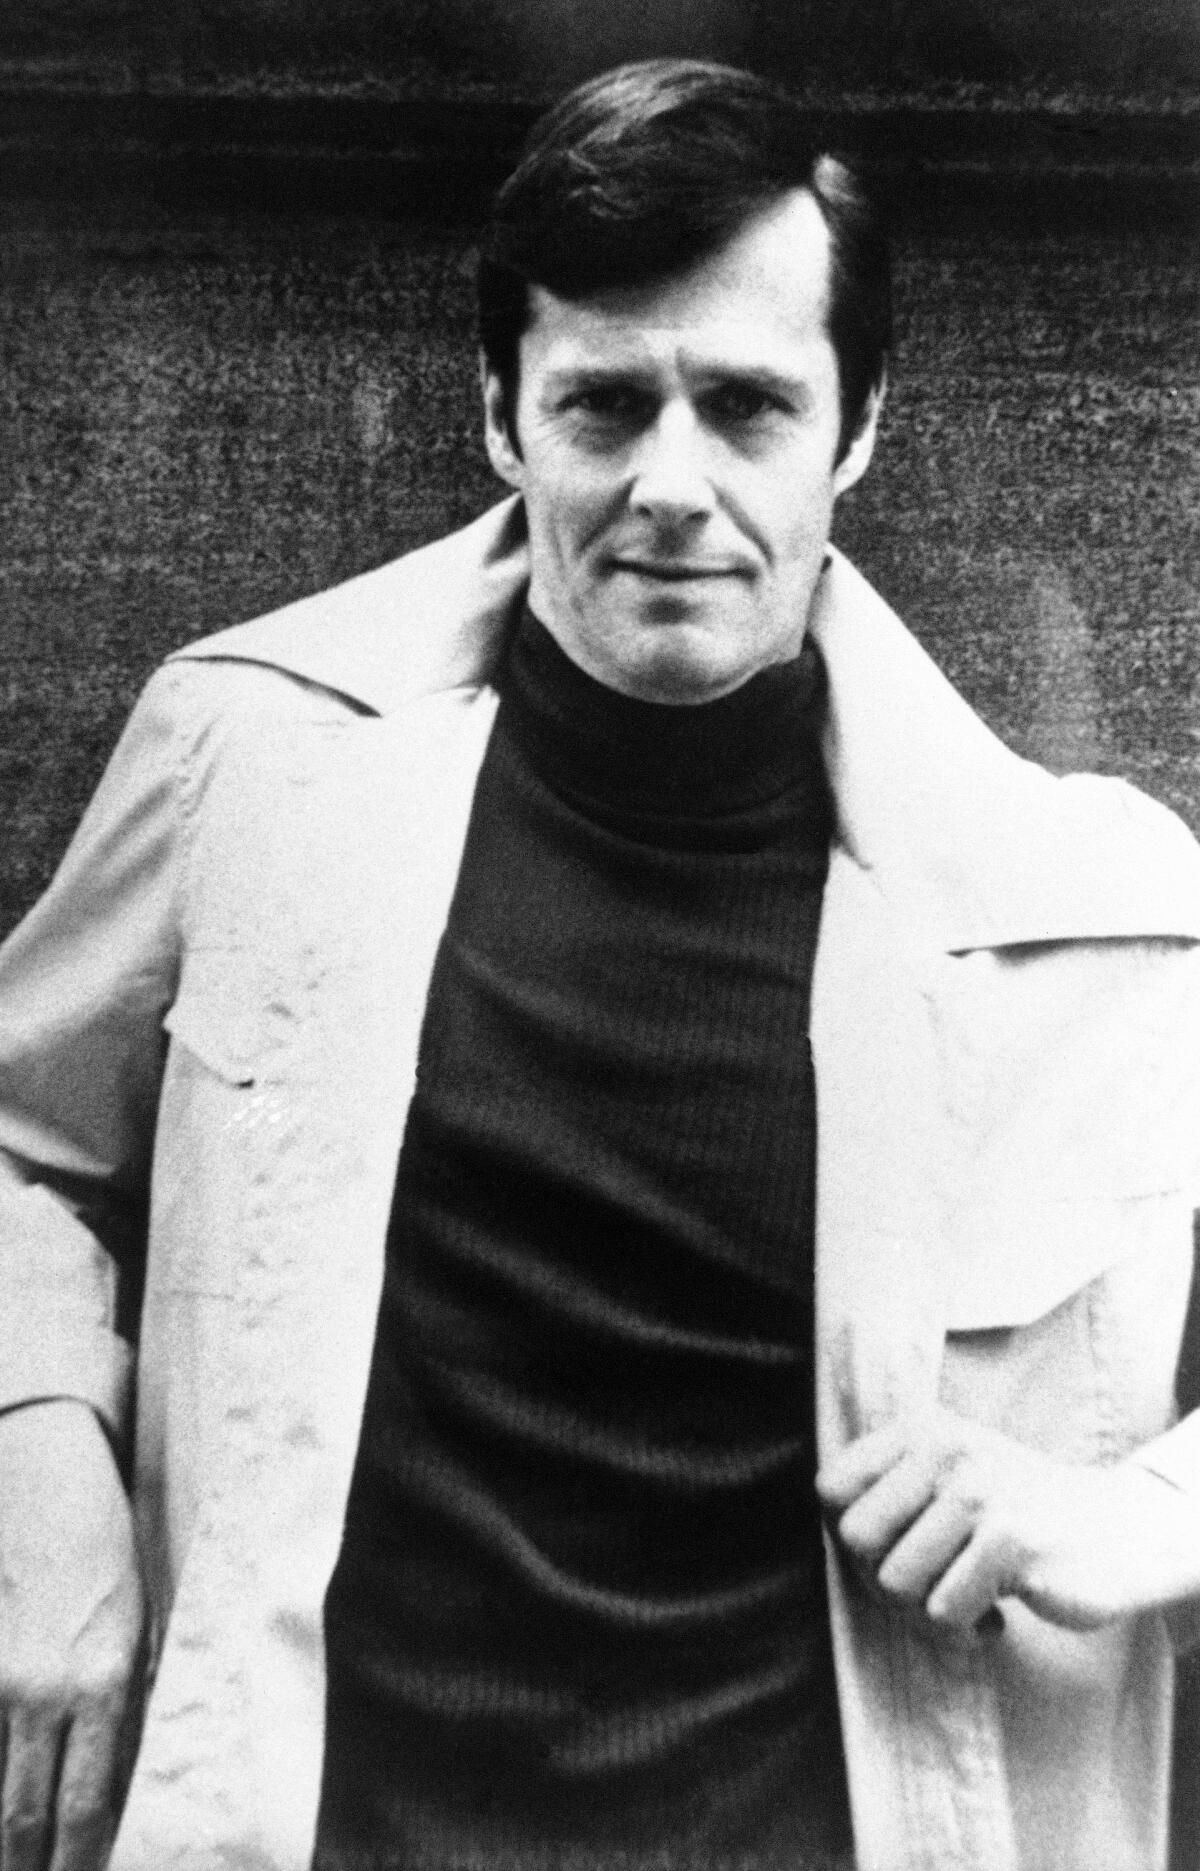 Ned Rorem, seen wearing a trench coat in a vintage black-and-white photo, stands with a hand at his waist.